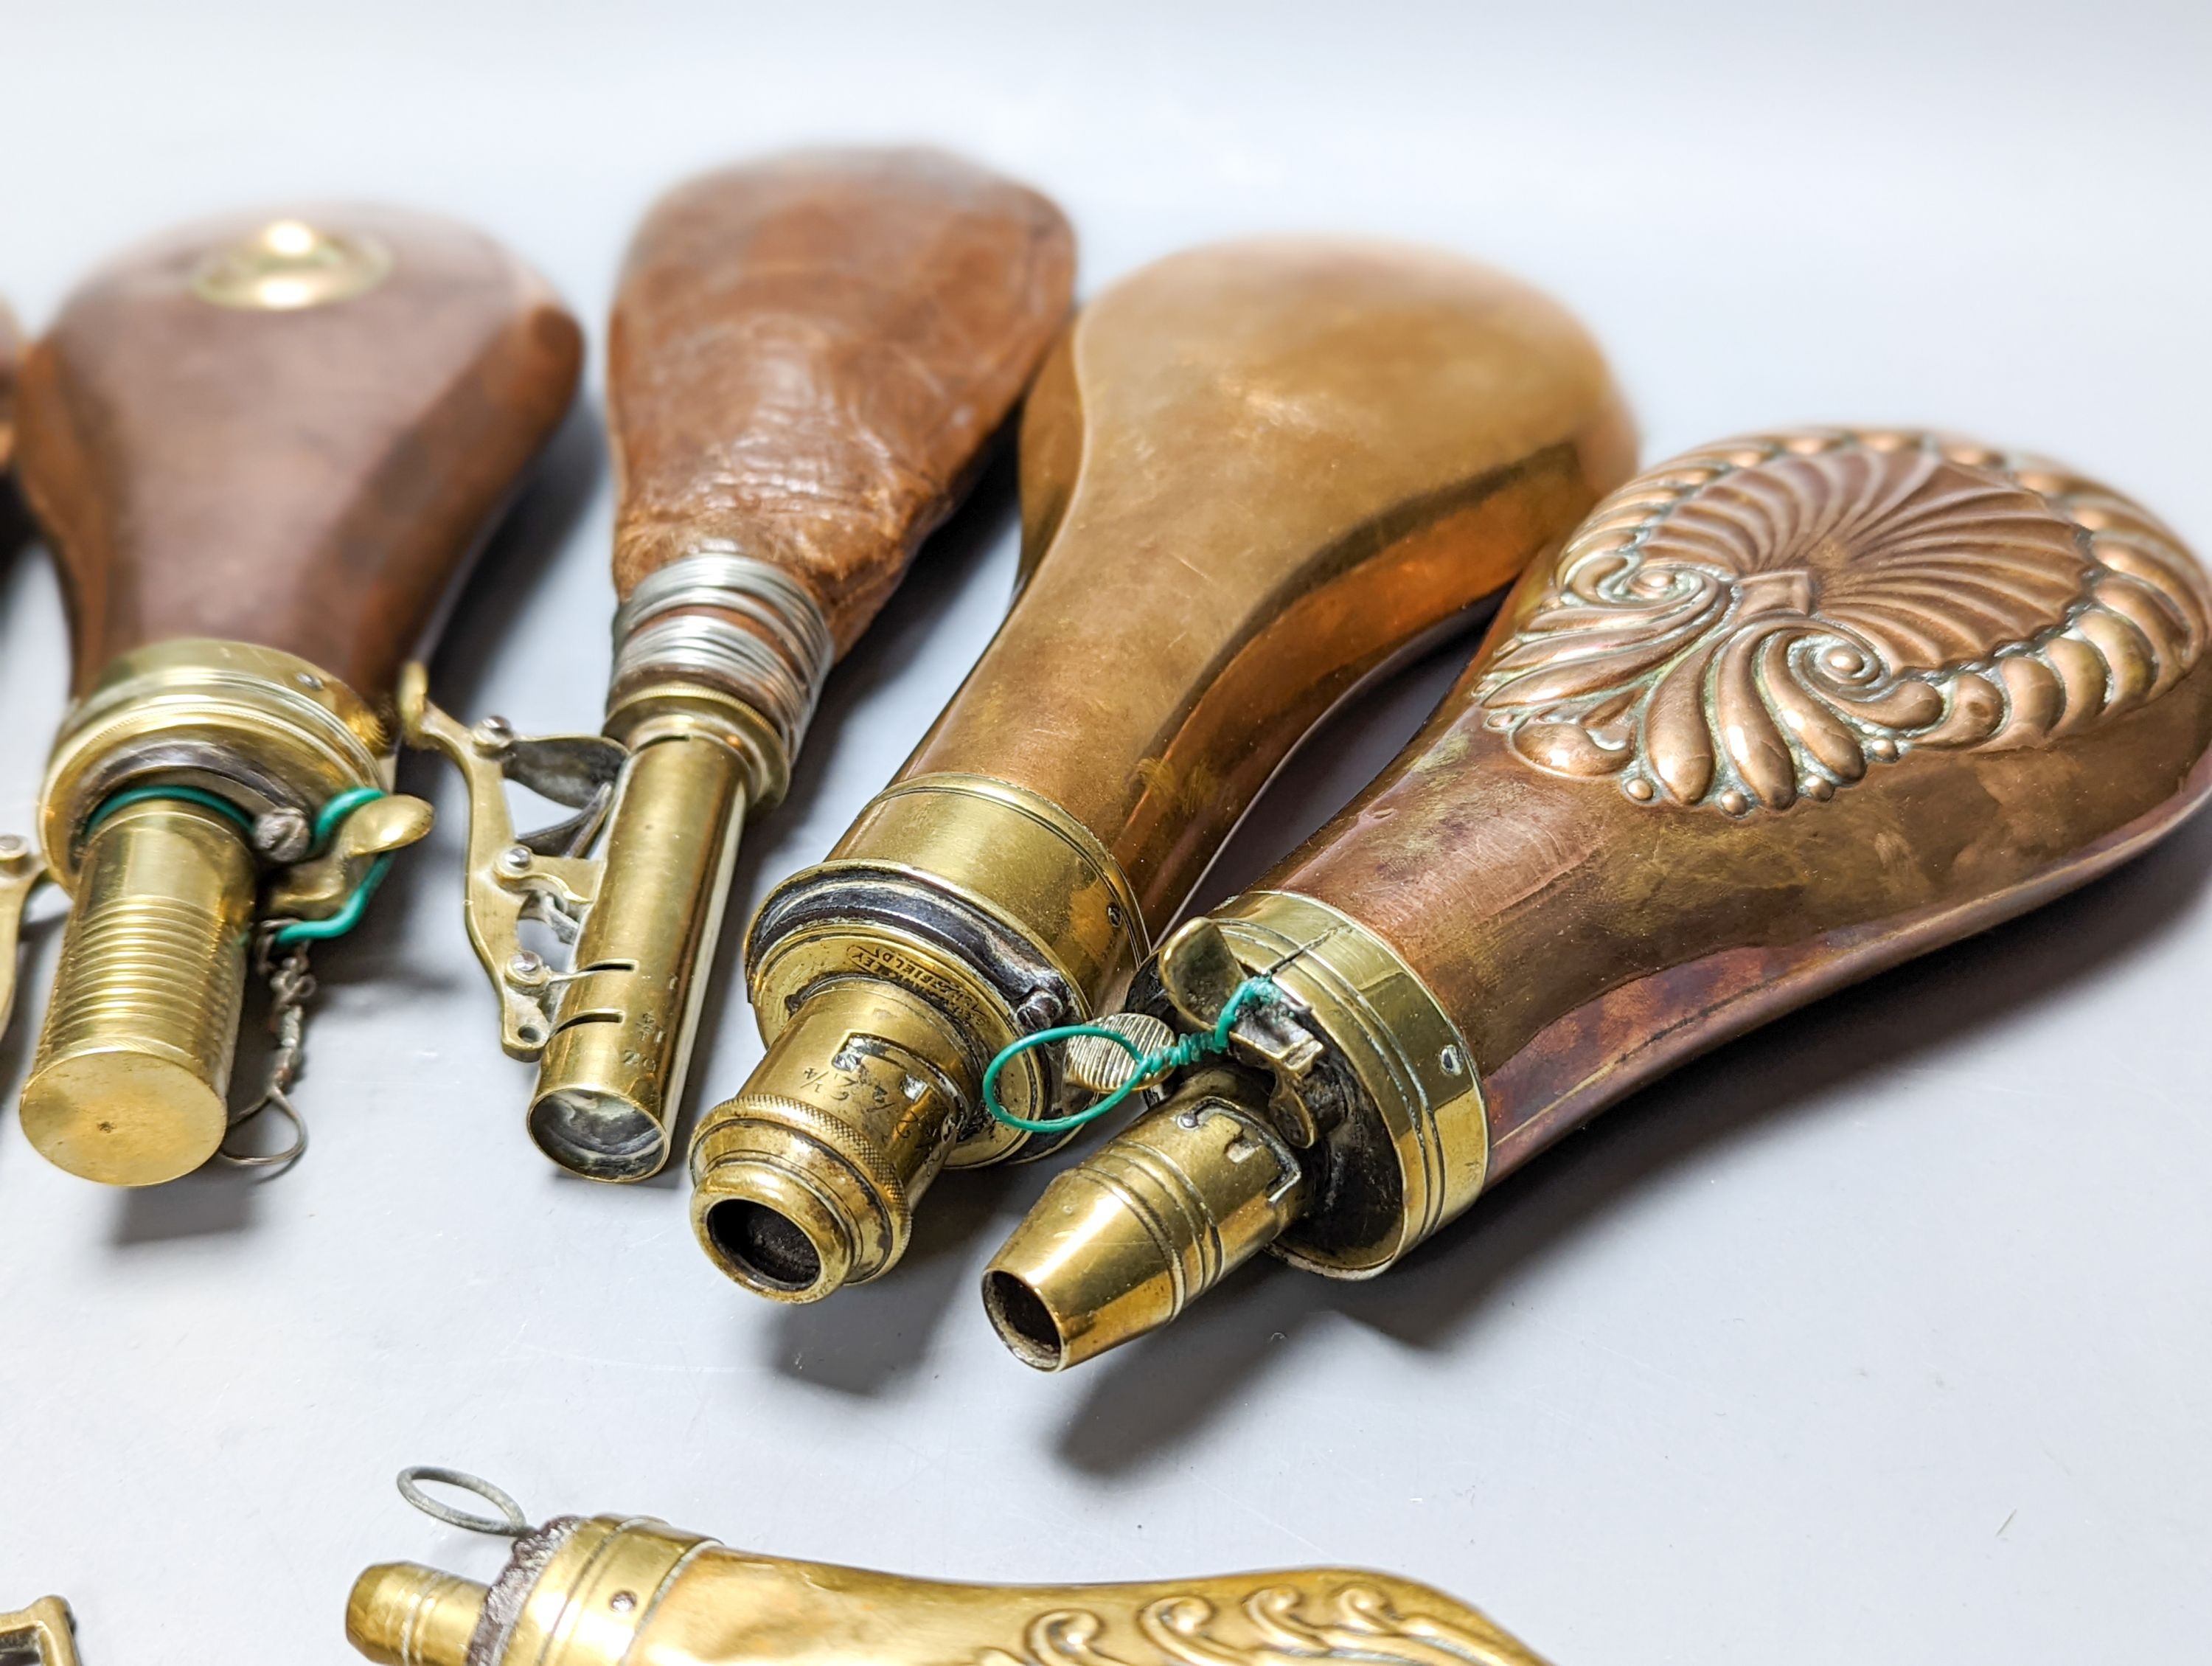 Six powder/shot flasks, 4 copper and brass, 2 leather and brass, together with a carved powder horn (7)